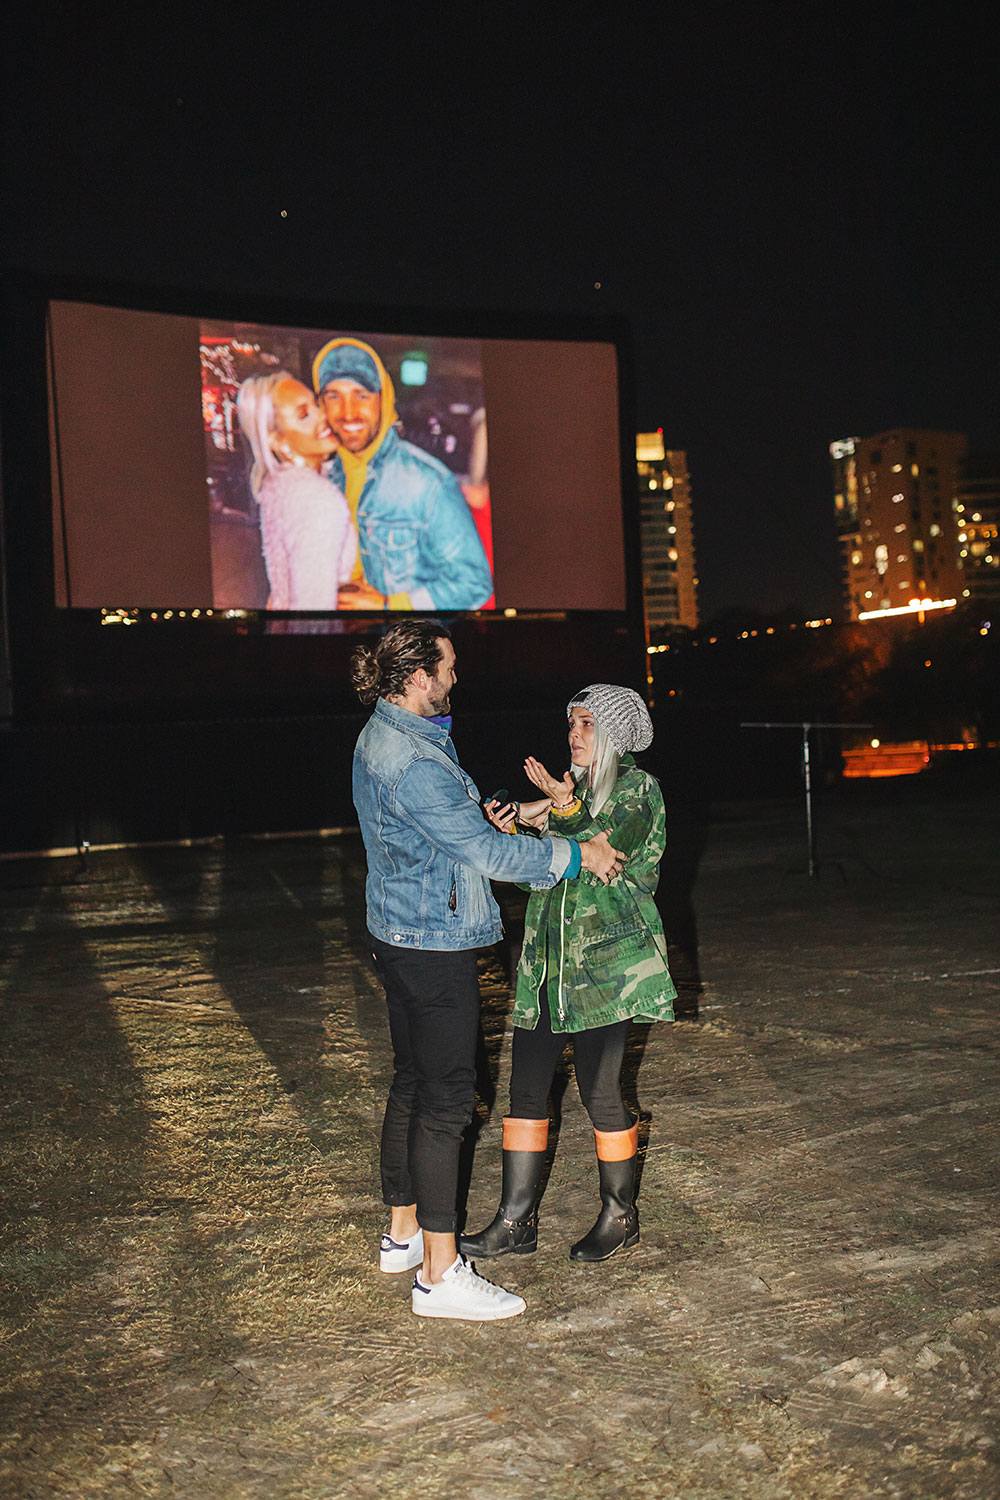 dallas marriage proposal idea - drive-in movie theater rooftop cinema